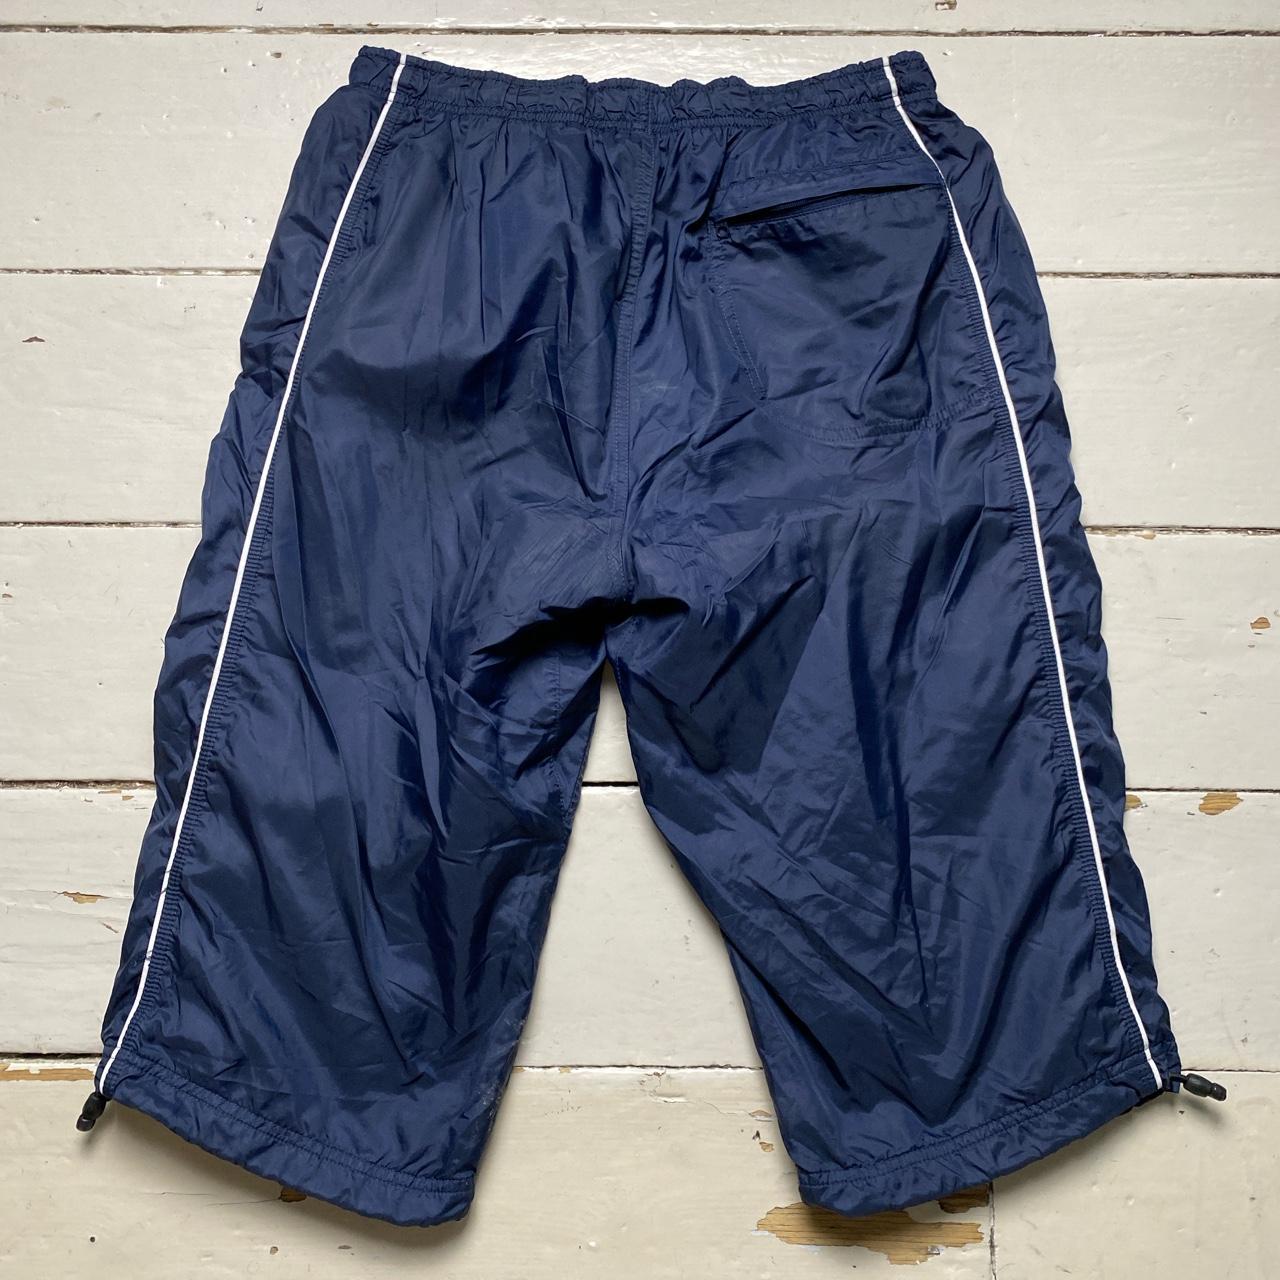 Nike Vintage Baggy Shell Navy and White Track Pant Shorts